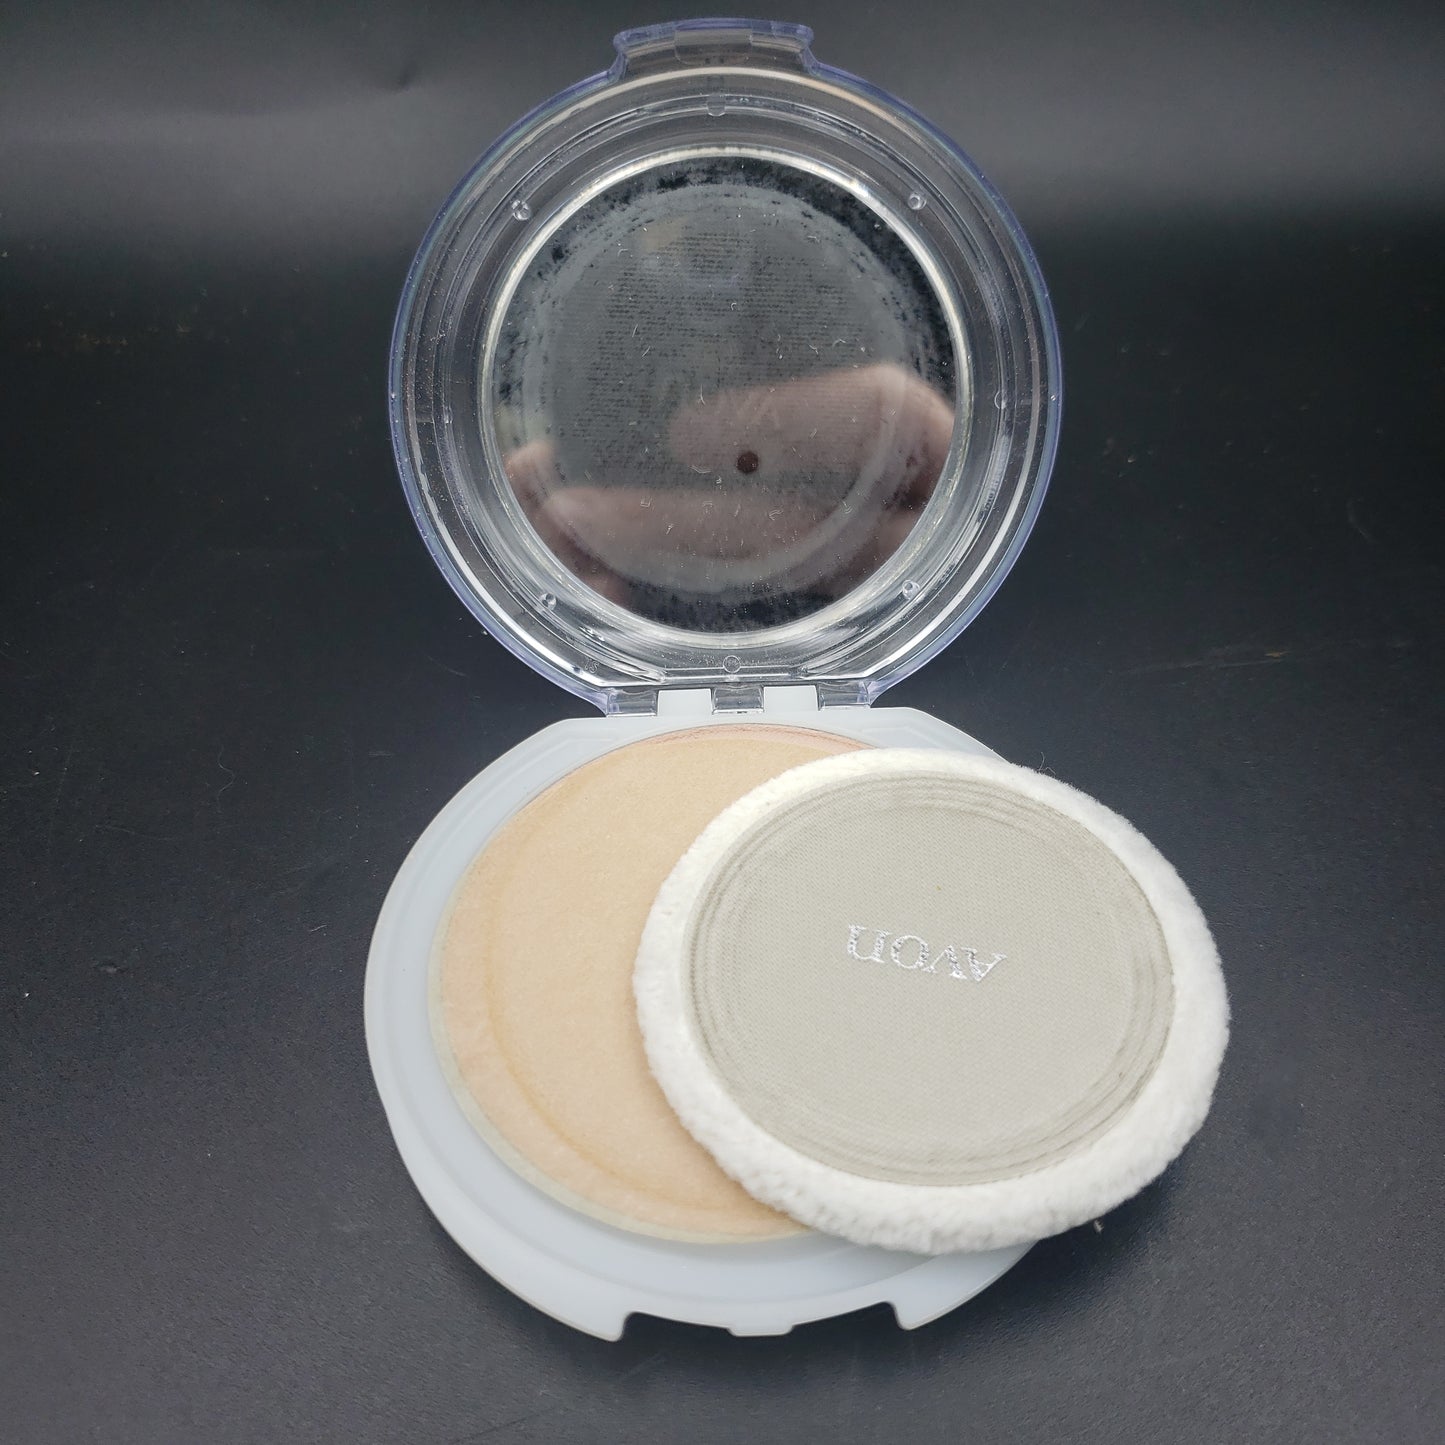 Avon "Colorworks" compact with refill